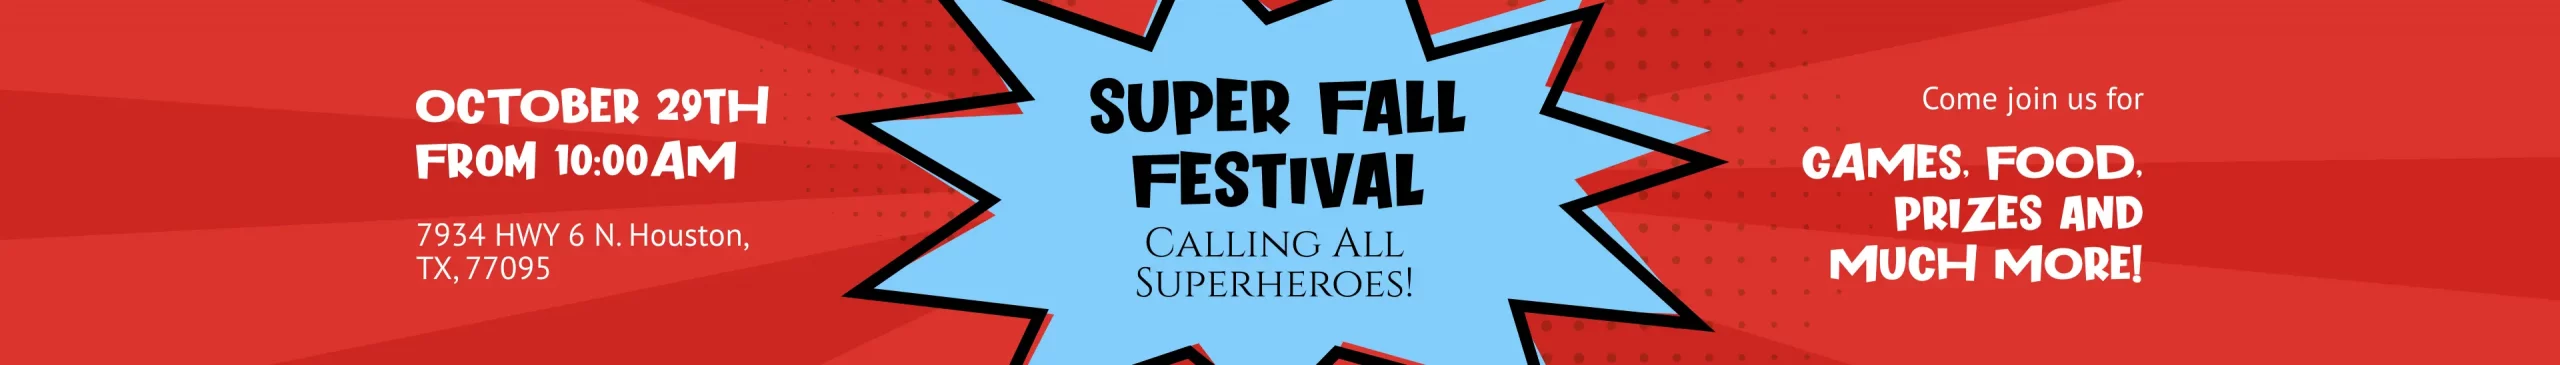 Super Fall Festival at Ncelc